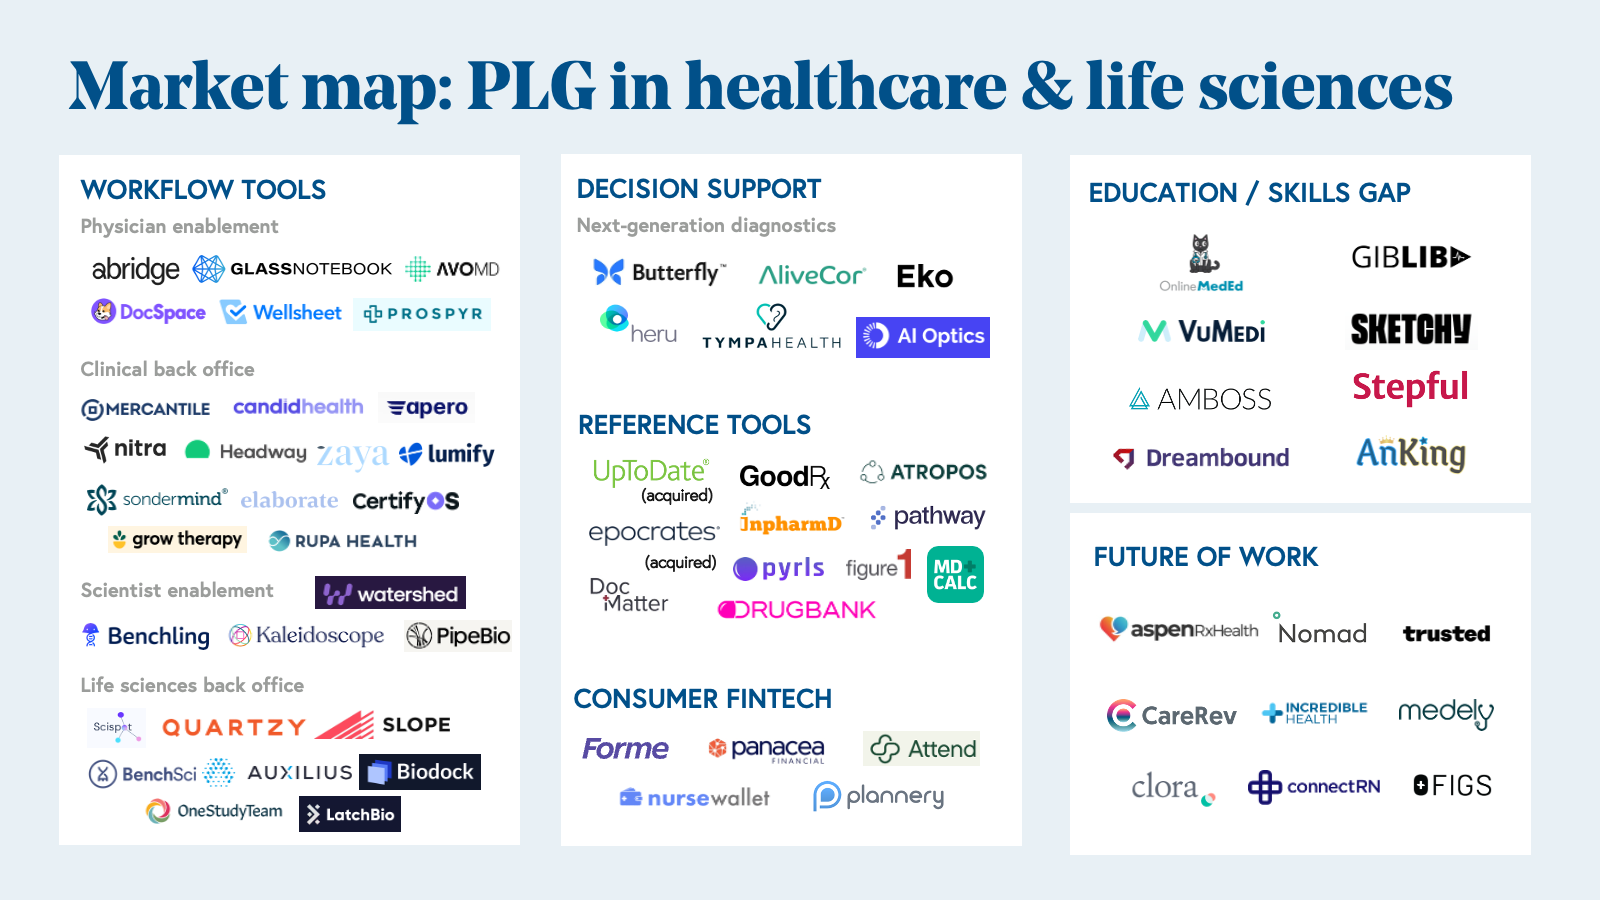 market map of plg healthcare and life science companies 